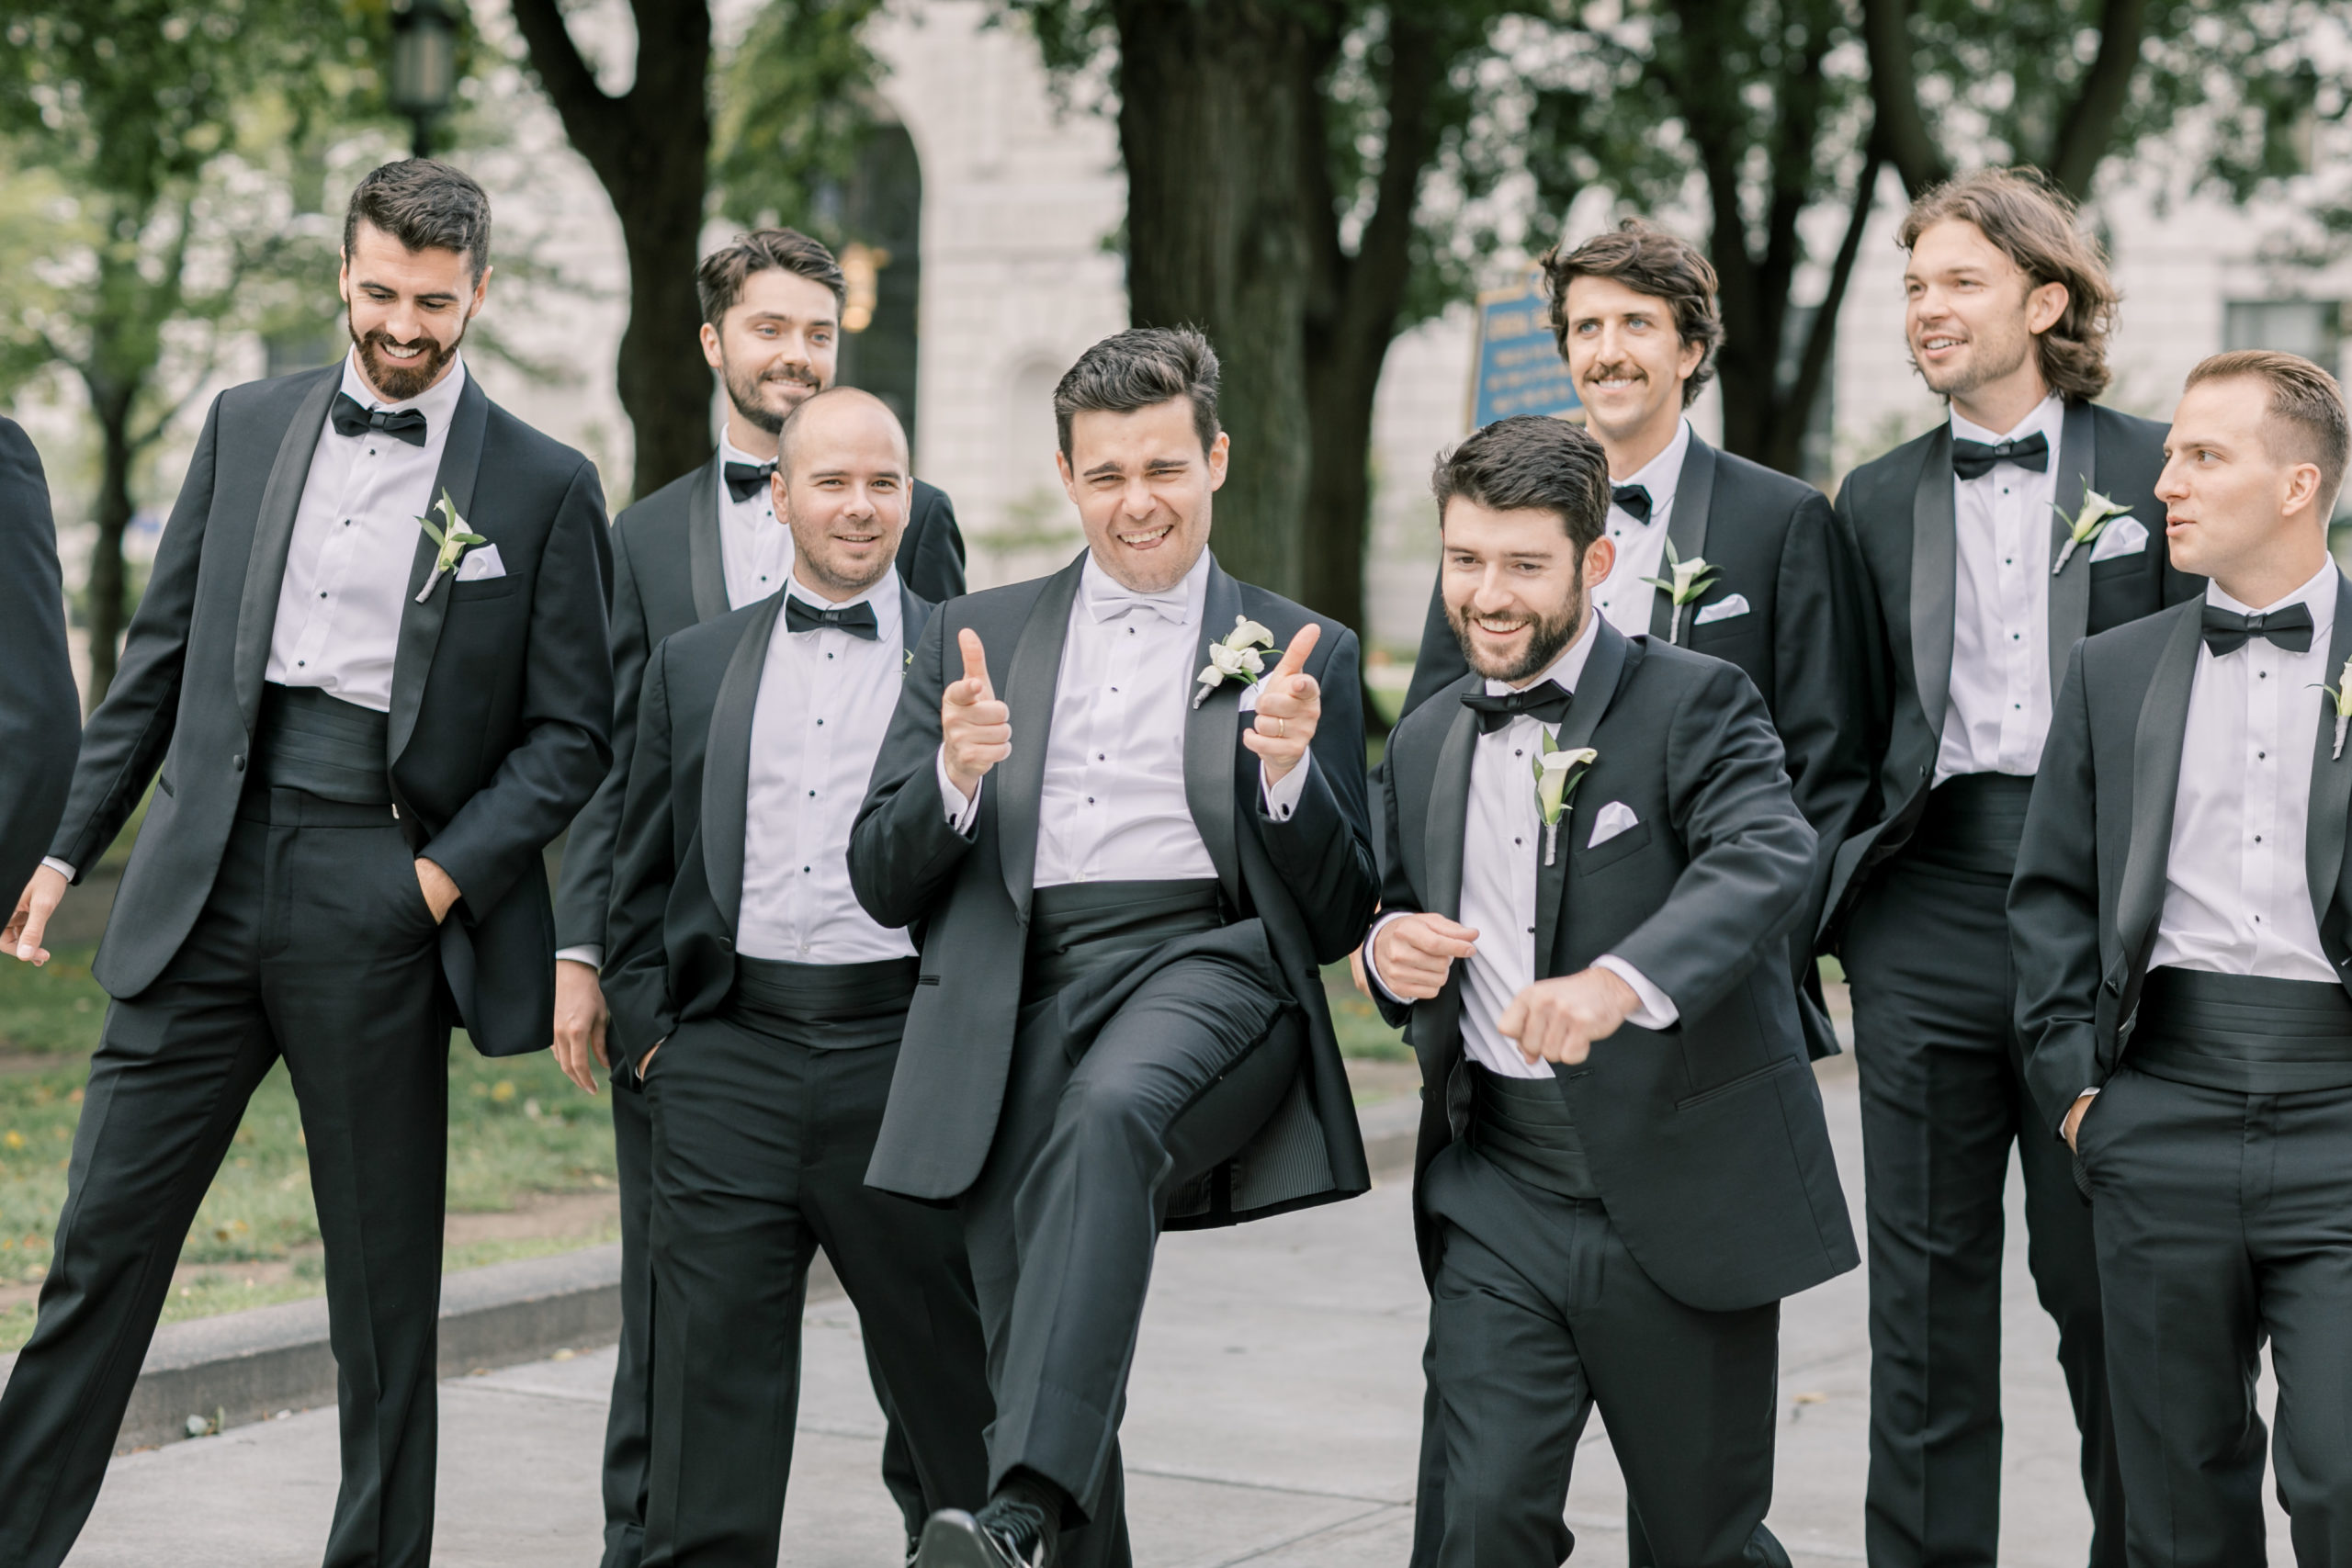 Groom and groomsmen casually walking down the sidewalk on a wedding day. After using my wedding day emergency kit to sew back on some suit buttons, they were all happy and having a great time.